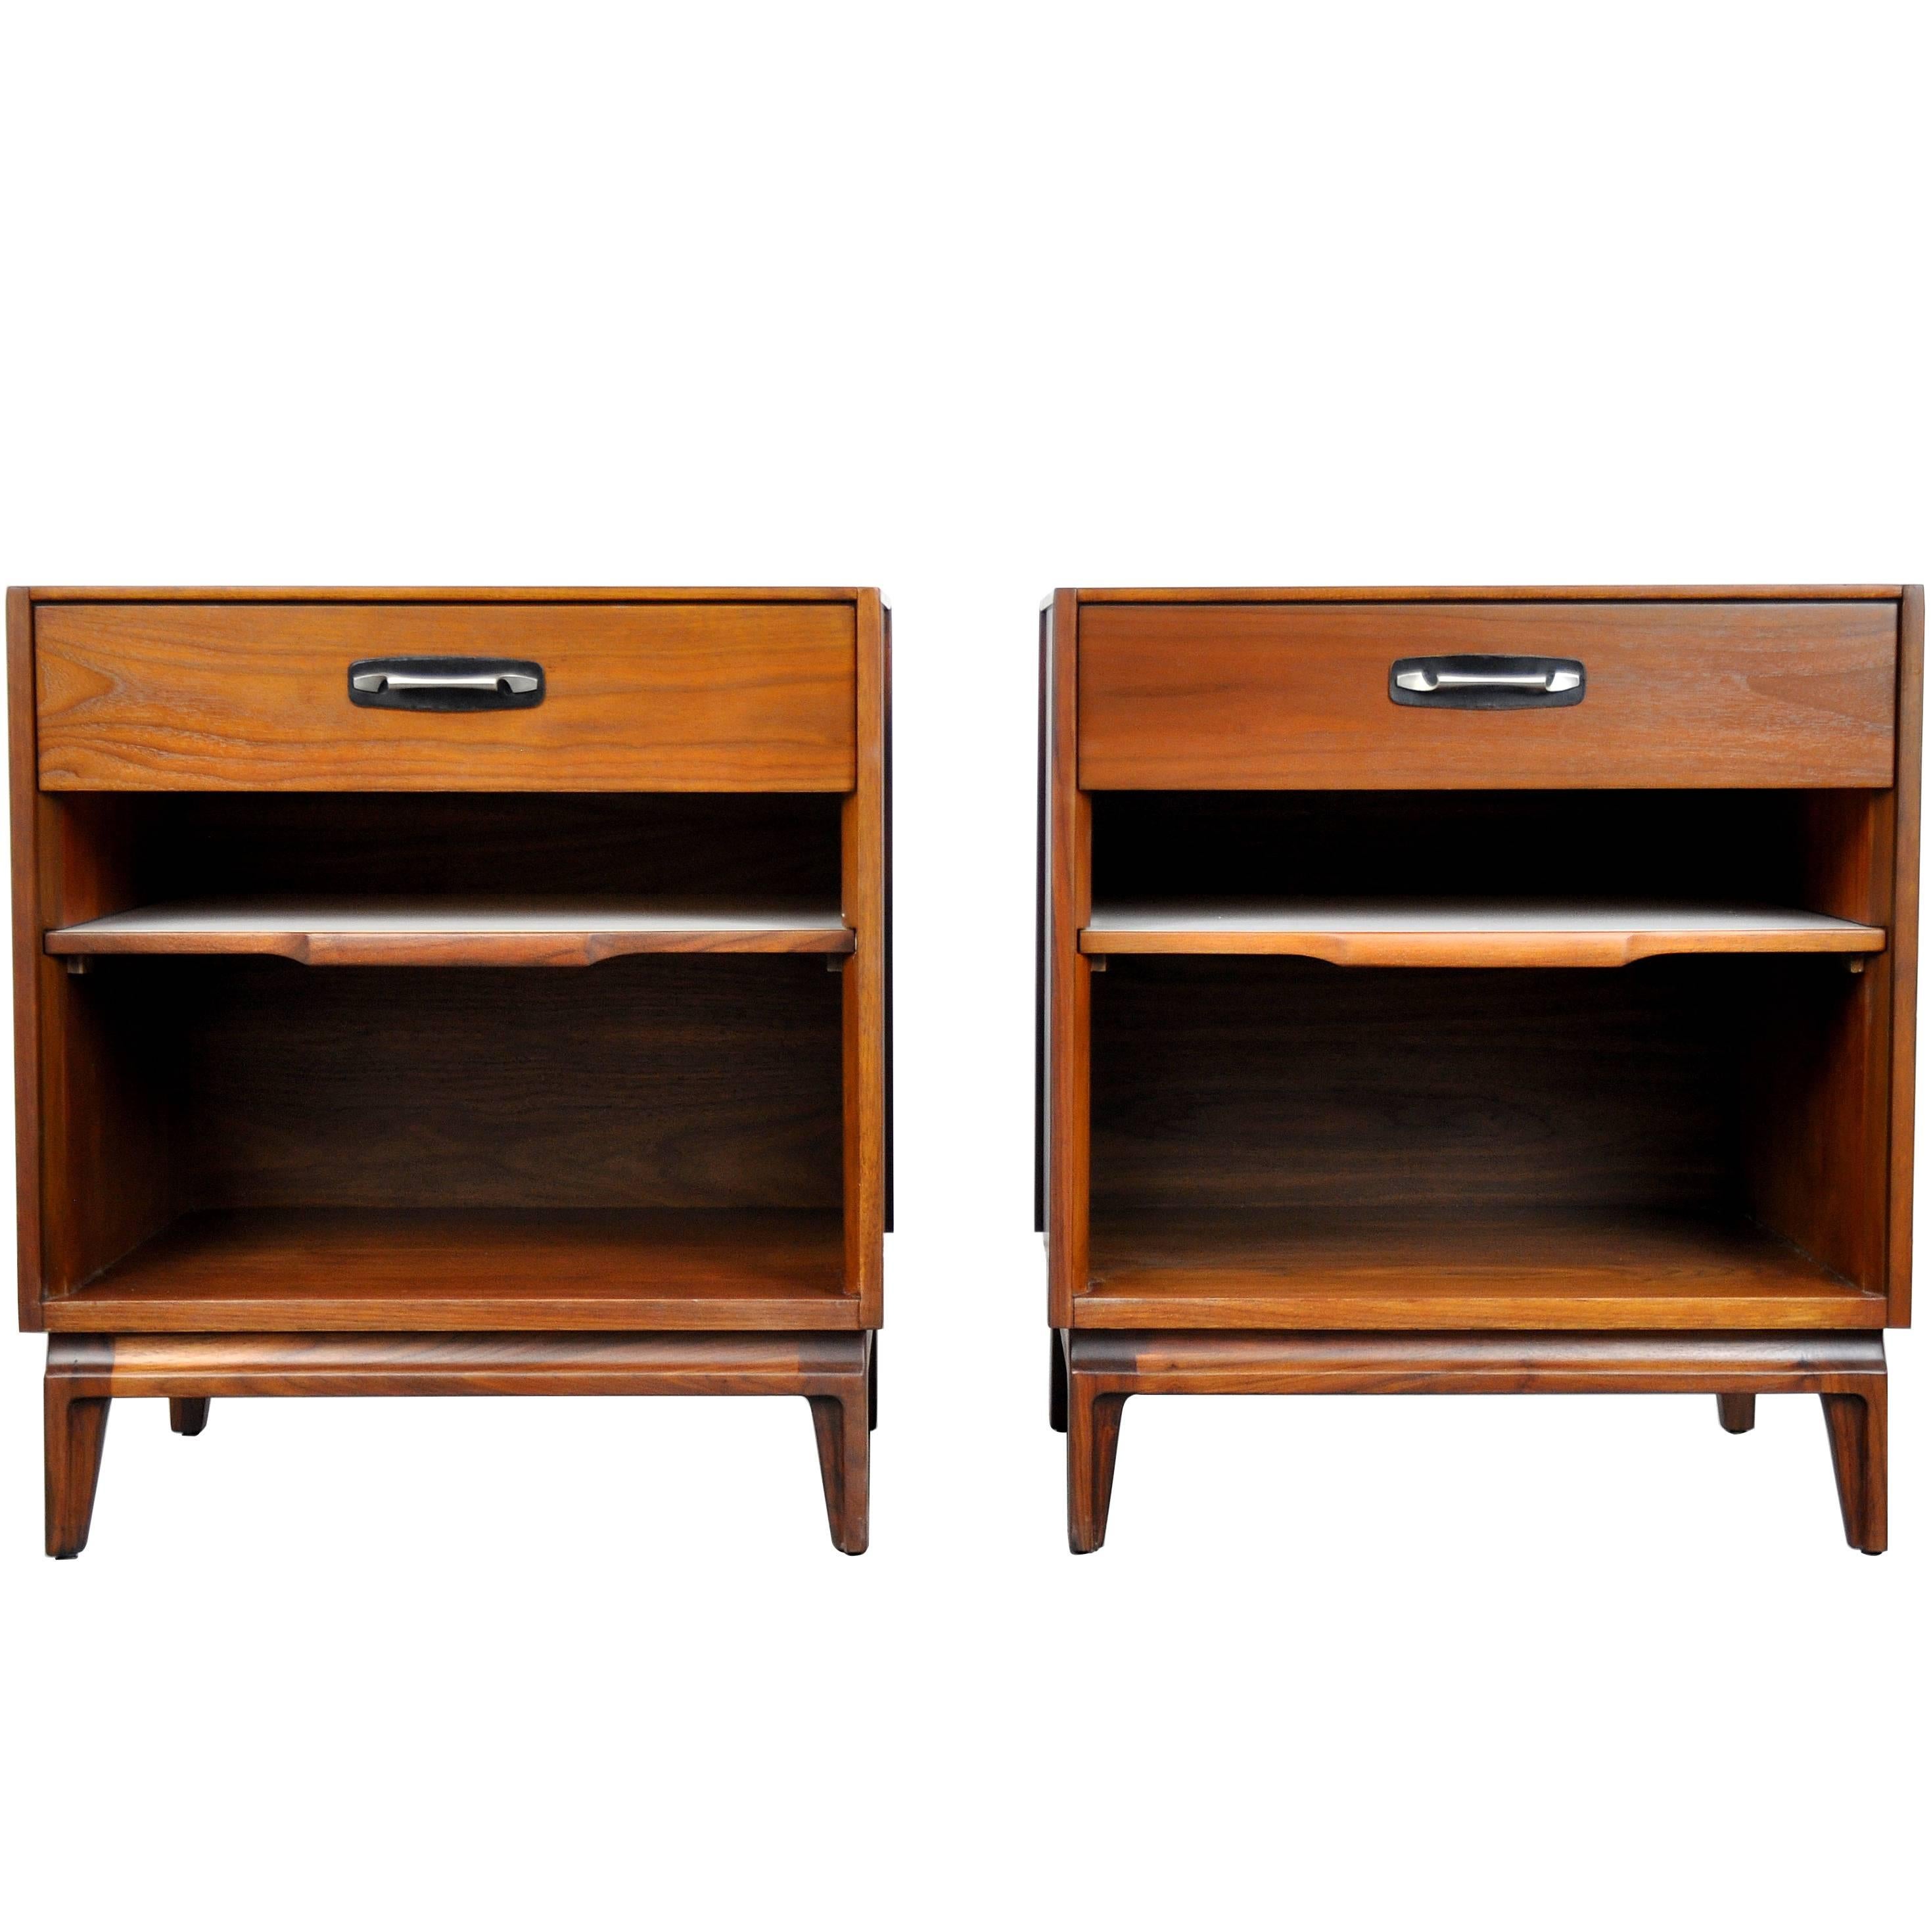 Pair of Mid-Century Modern Walnut, Black Leather and Steel Nightstands